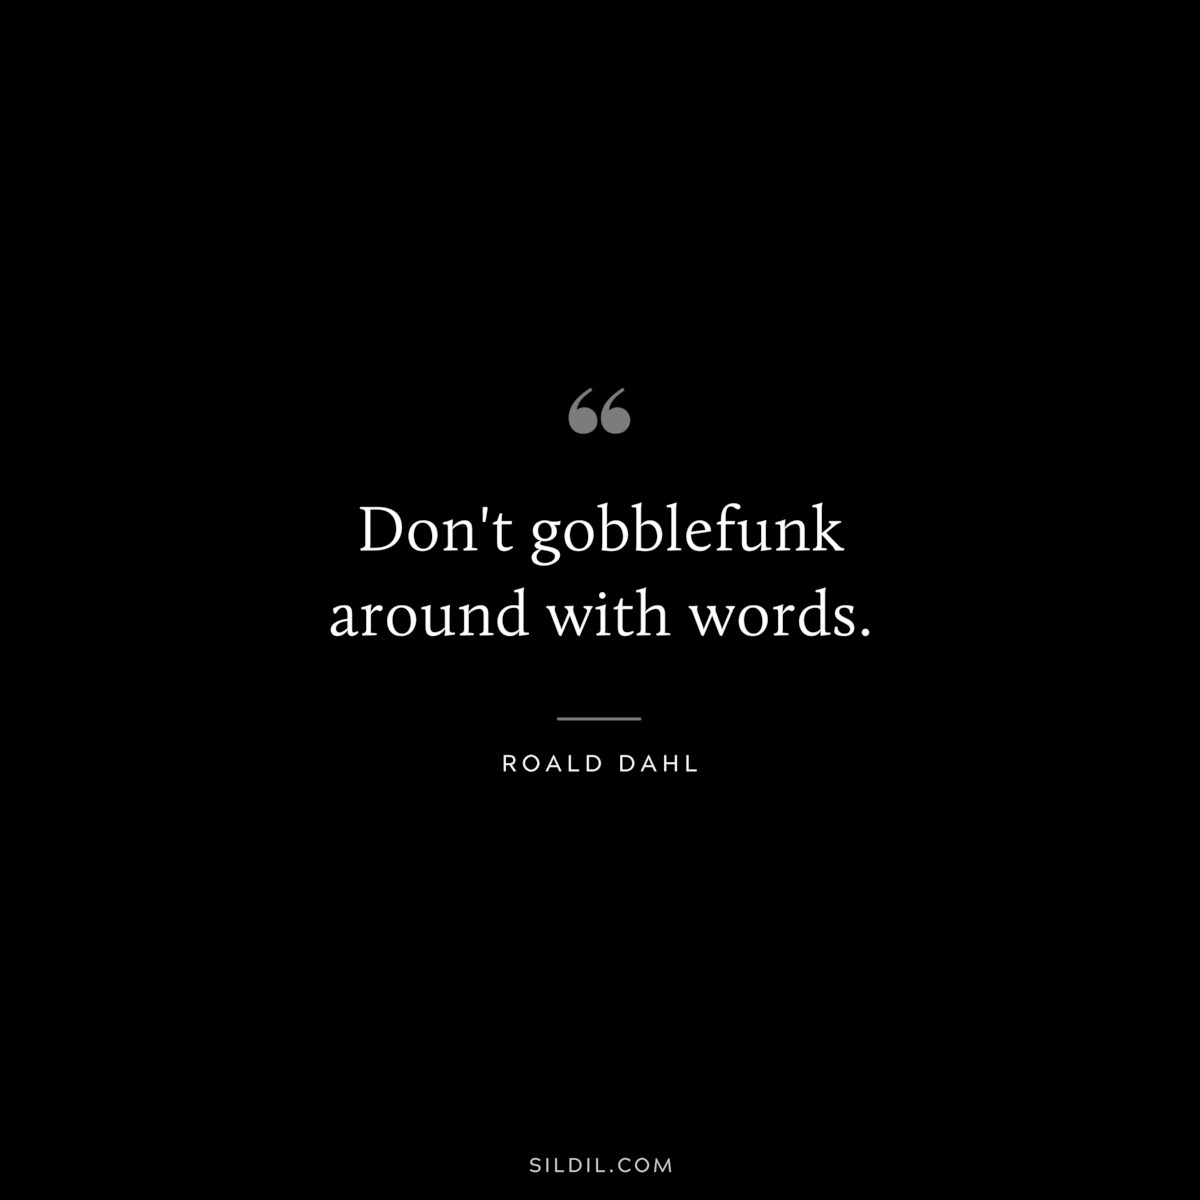 Don't gobblefunk around with words. ― Roald Dahl